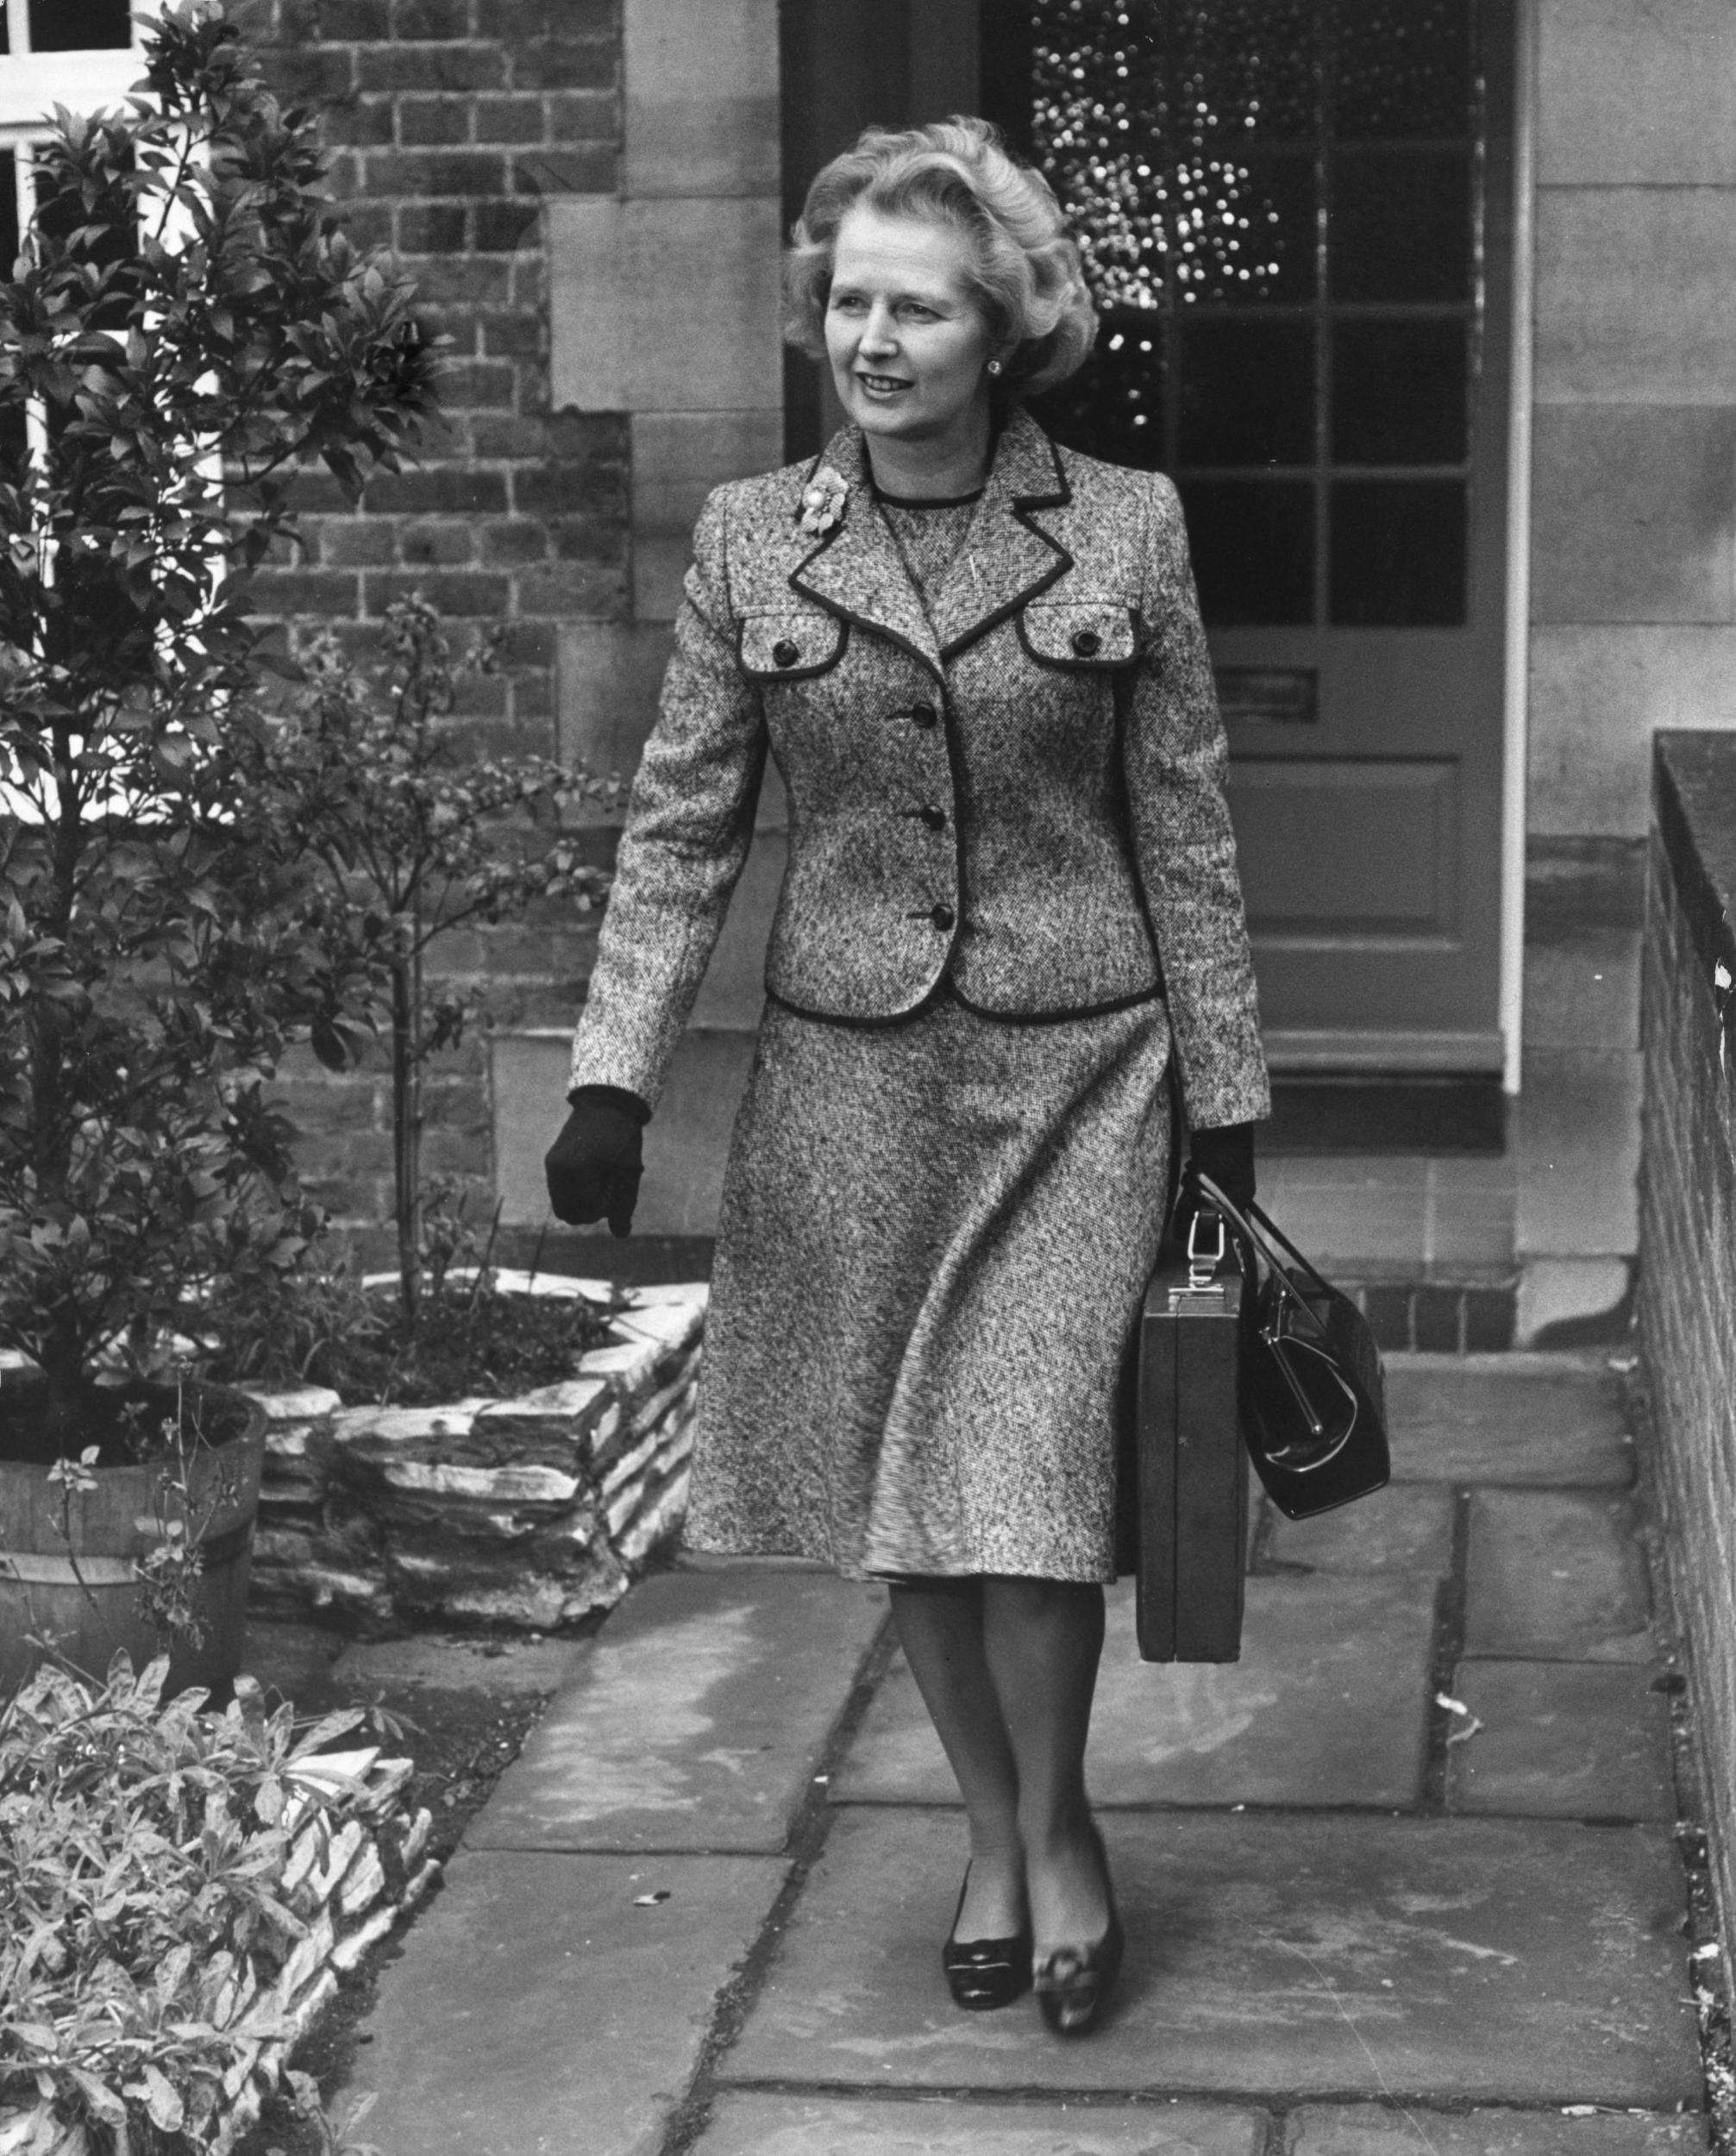 British politician Margaret Thatcher leaving her Chelsea home to attend the first ballot in the election for the leadership of the Conservative party.